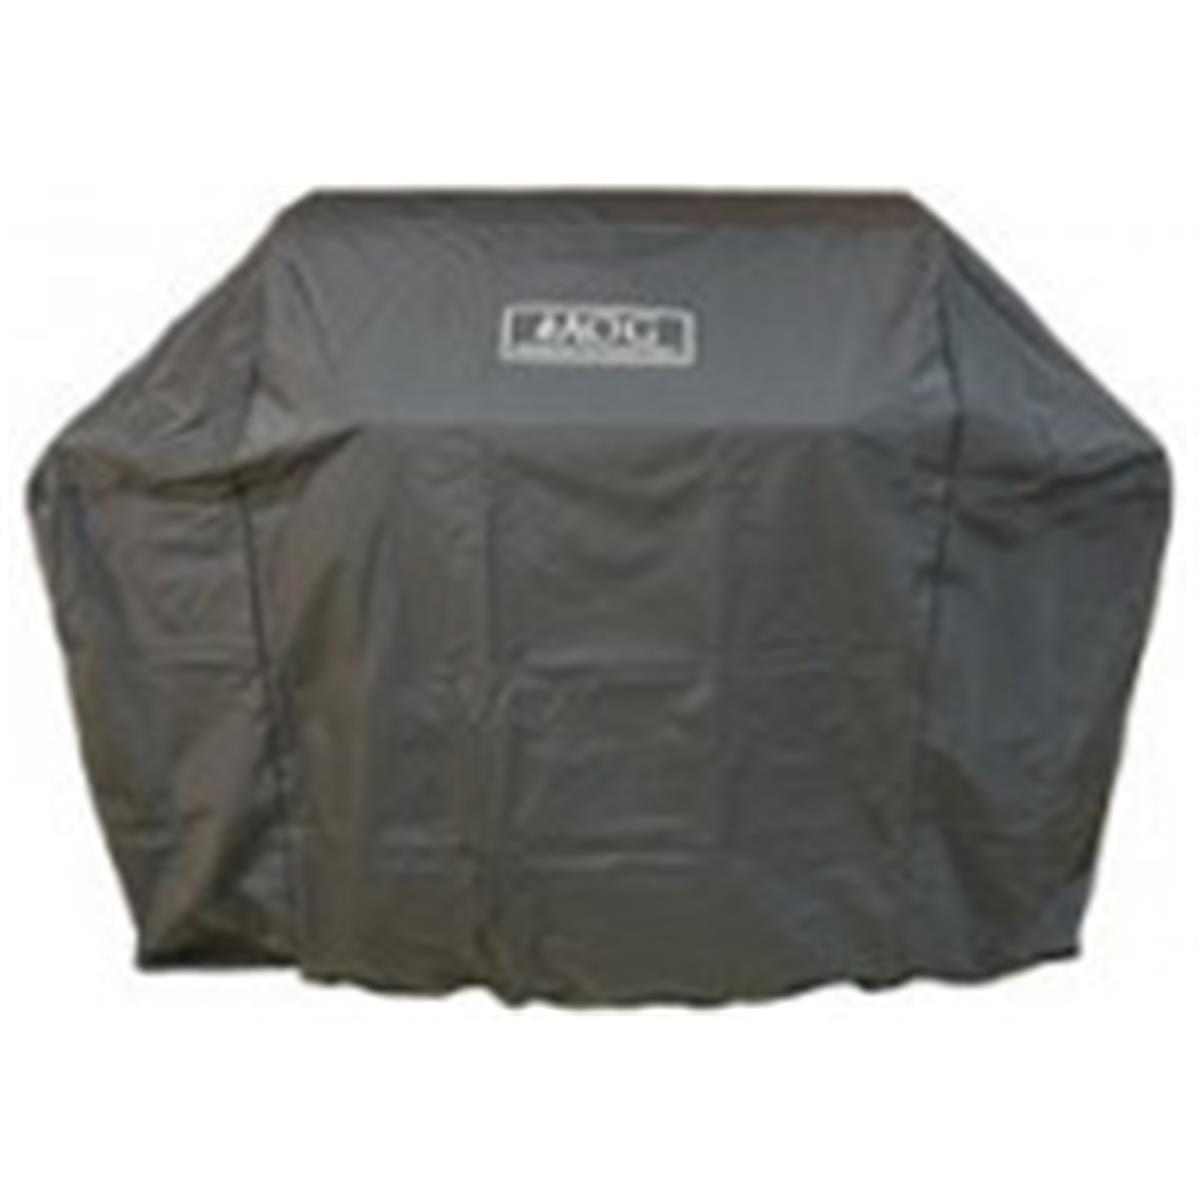 Cc30-d 30 In. Vinyl Portable Grill Cover